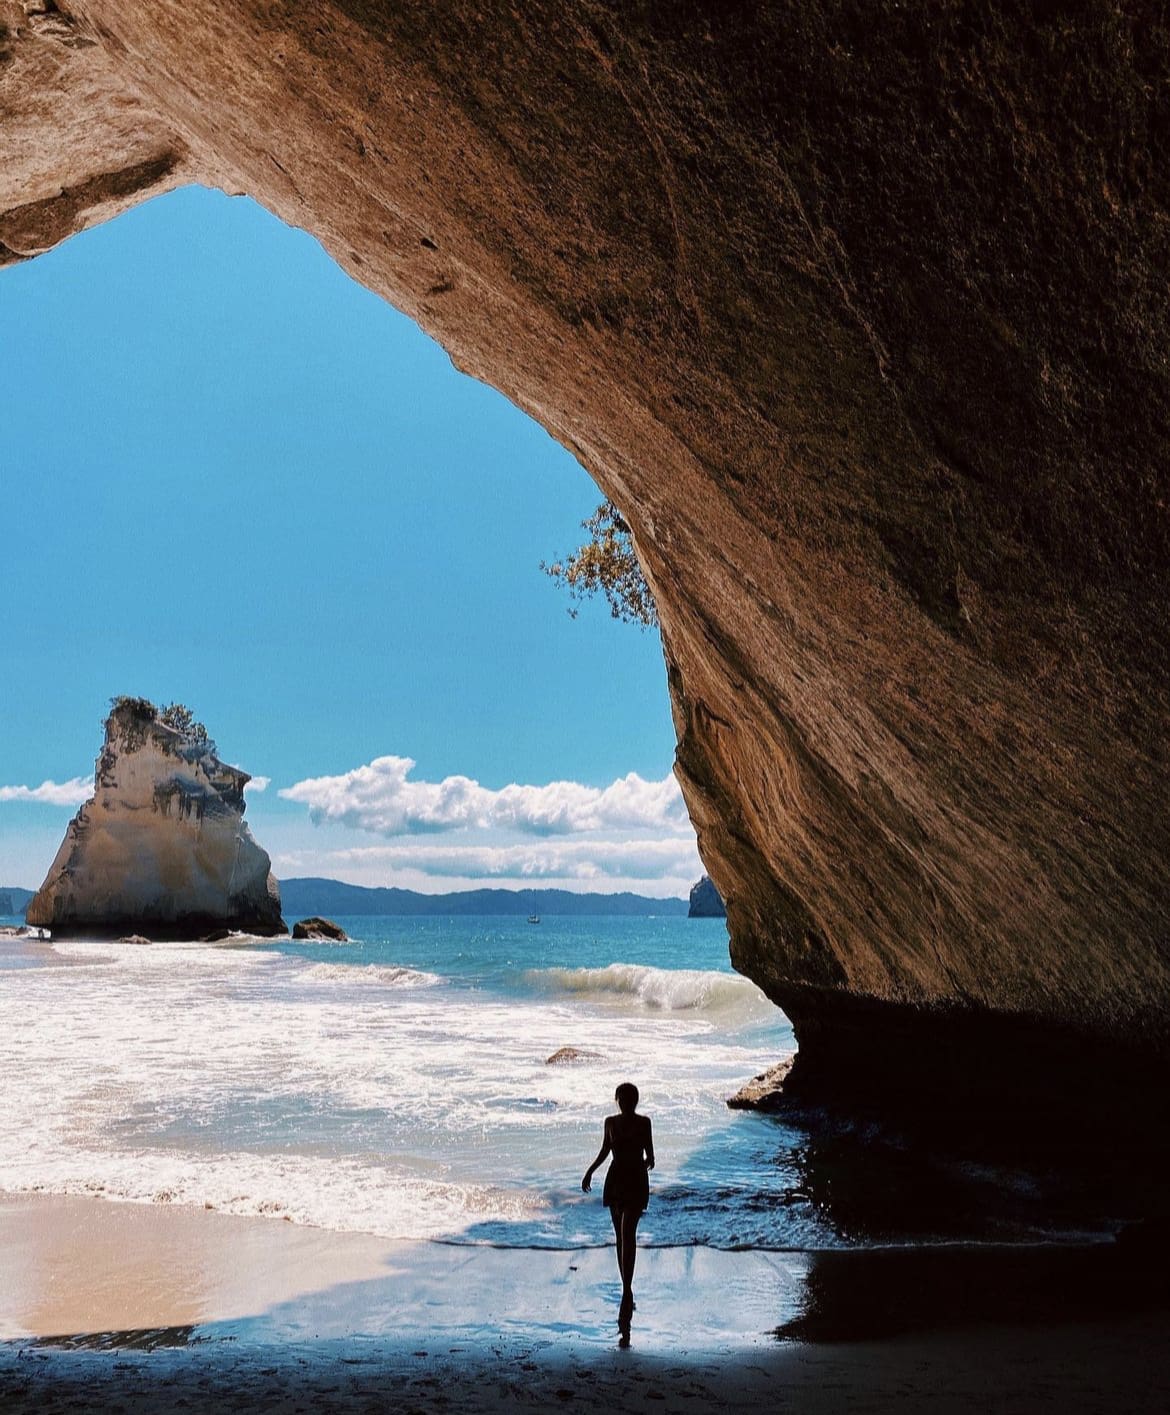 Cathedral Cove, Coromandel Peninsula - Best Road Trips In New Zealand